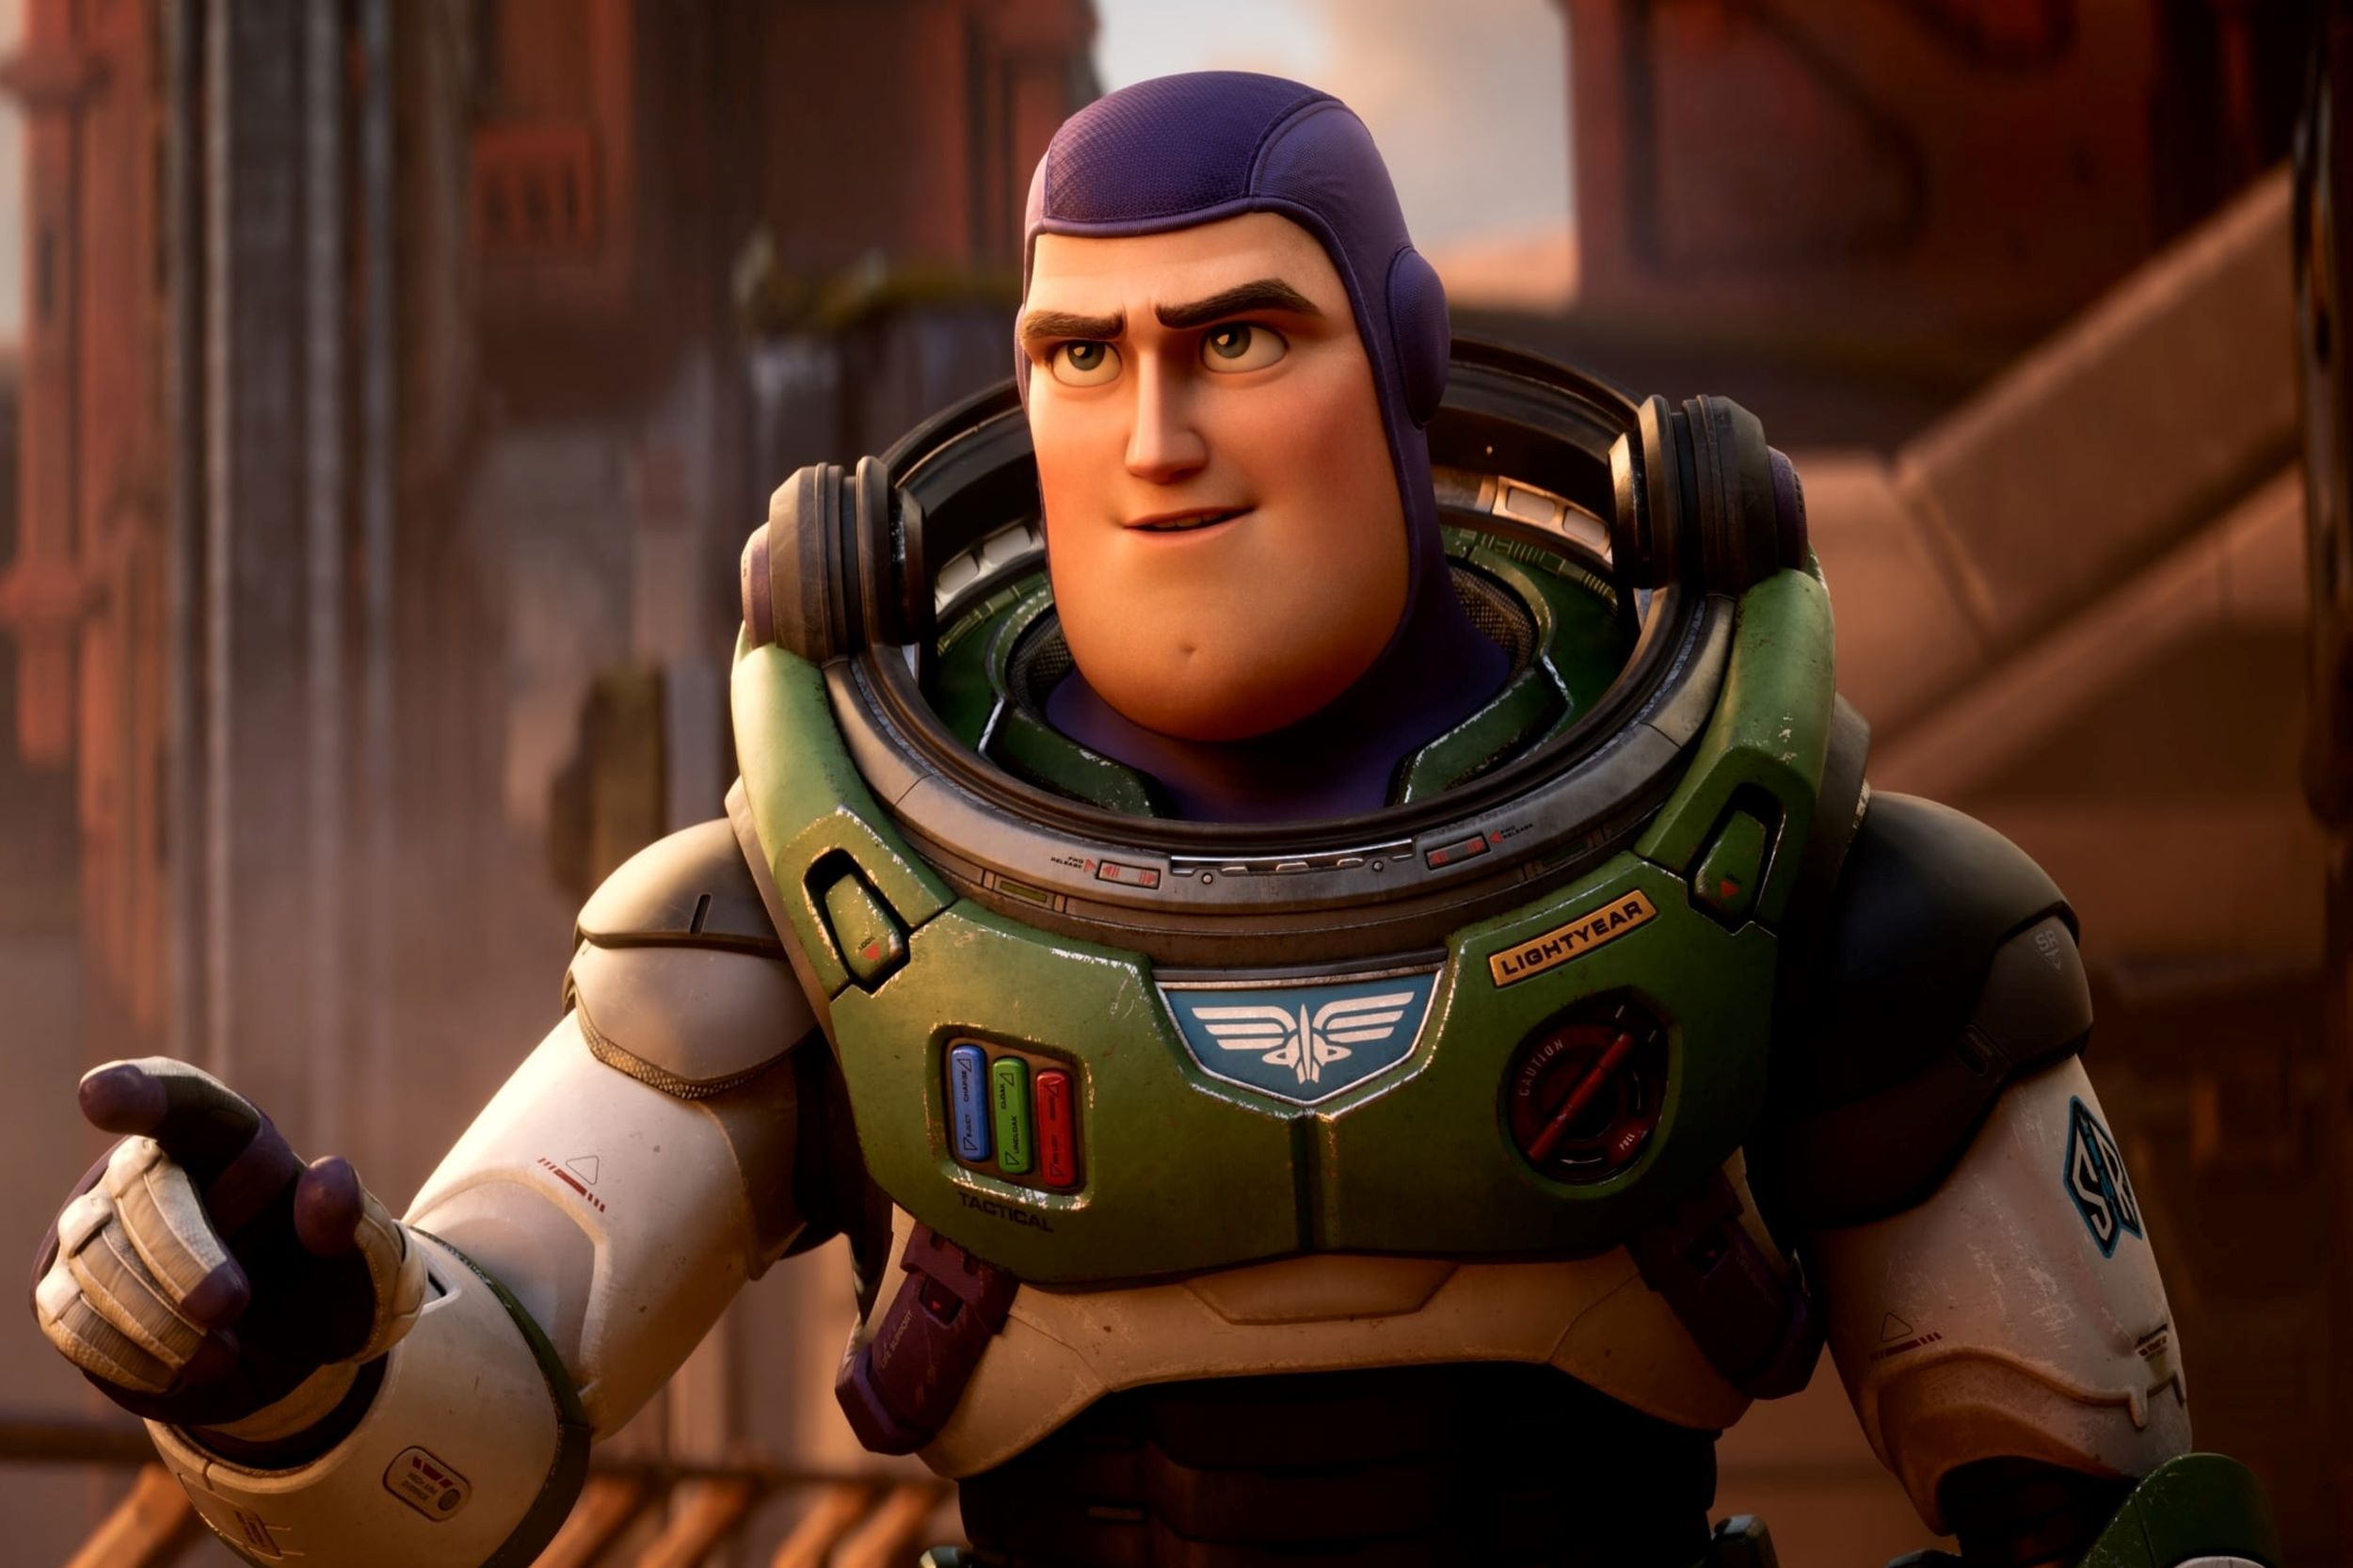 16-facts-about-buzz-lightyear-toy-story